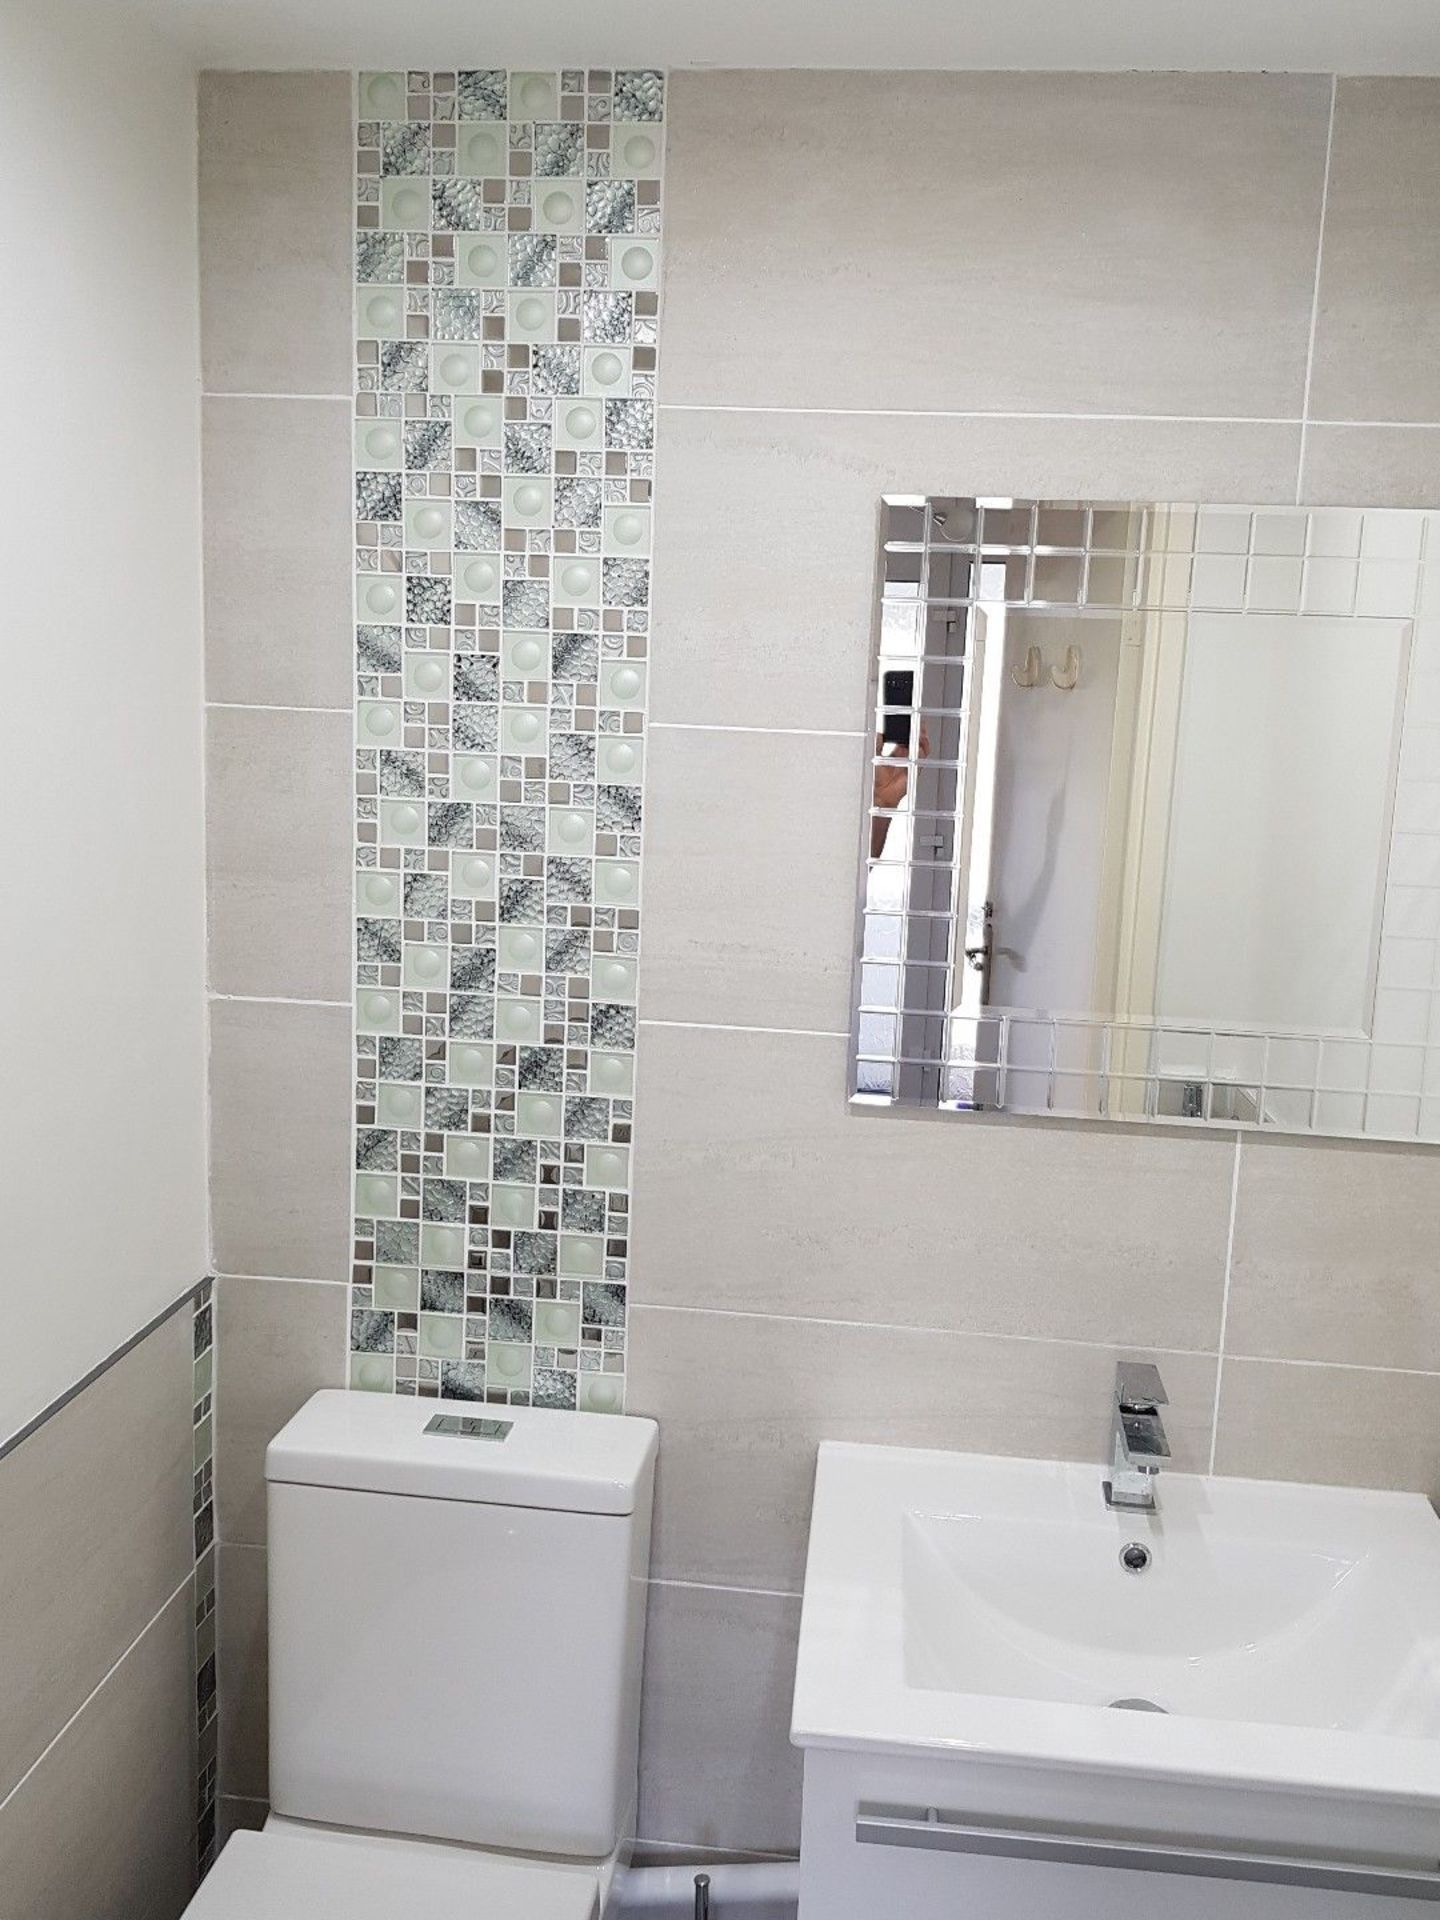 2 Square Metres - High Quality Glass/Stainless Steel Mosaic Tiles - Image 2 of 6